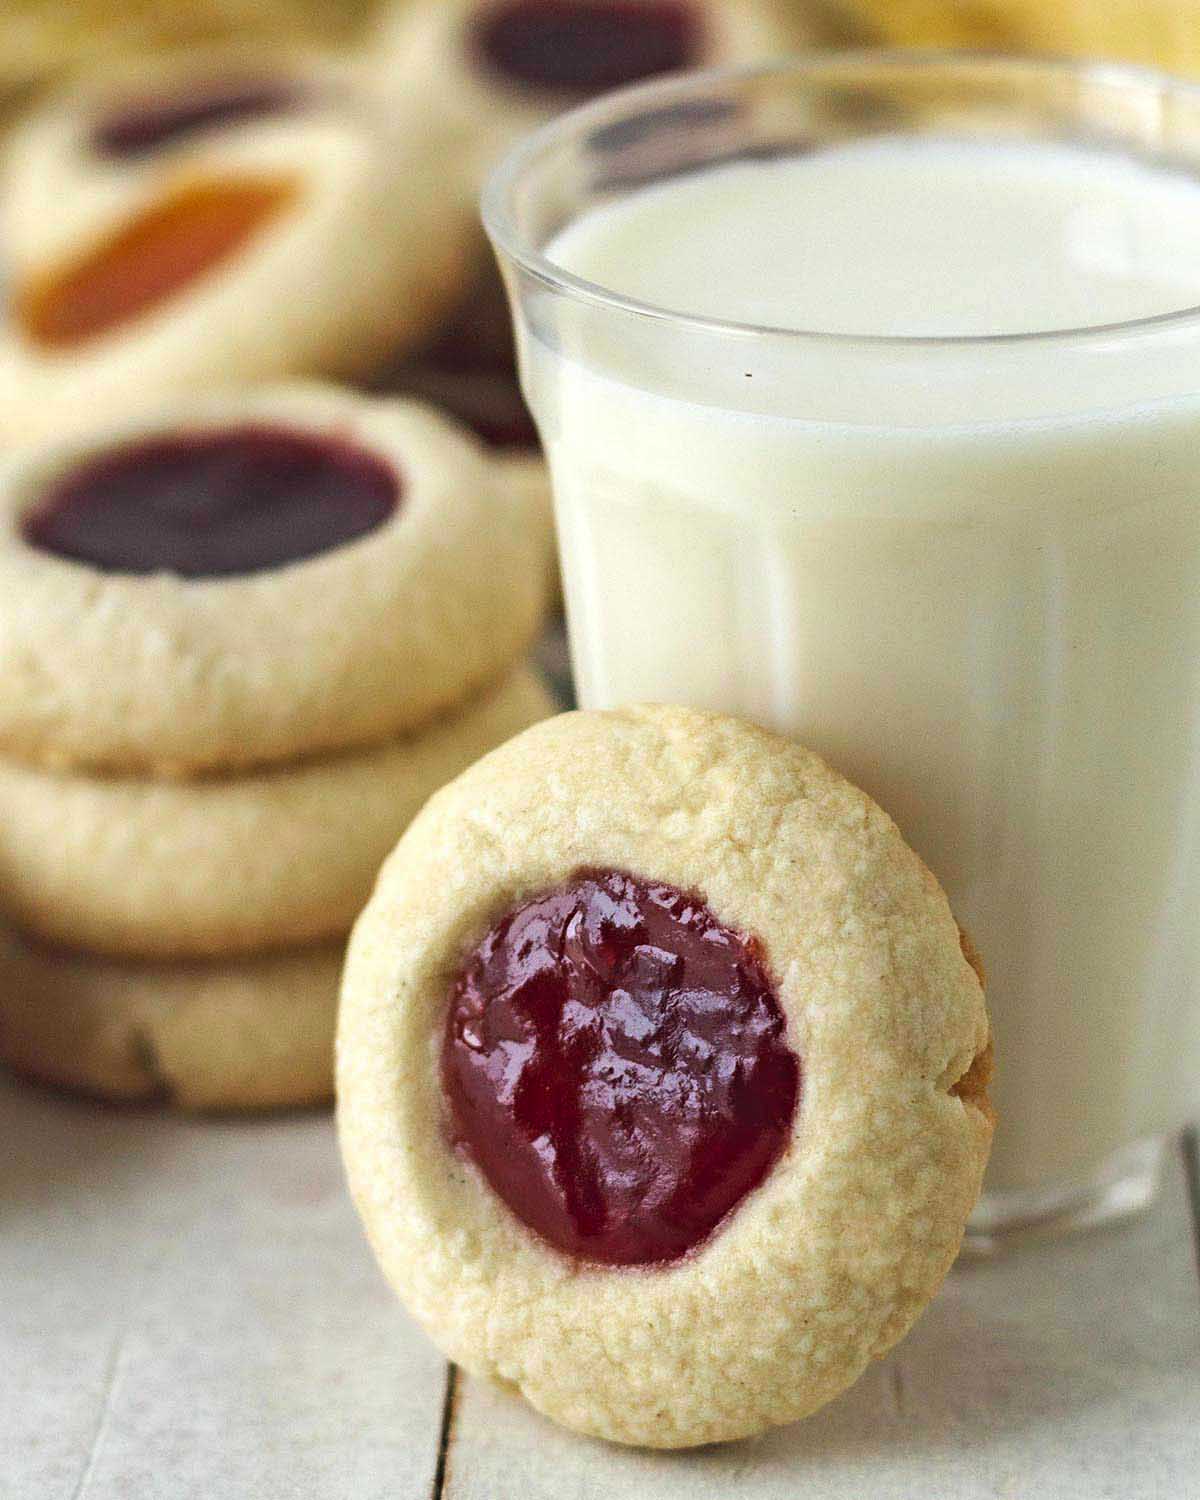 An egg-free-, dairy-free raspberry thumbprint cookies leaning on a glass of almond milk.